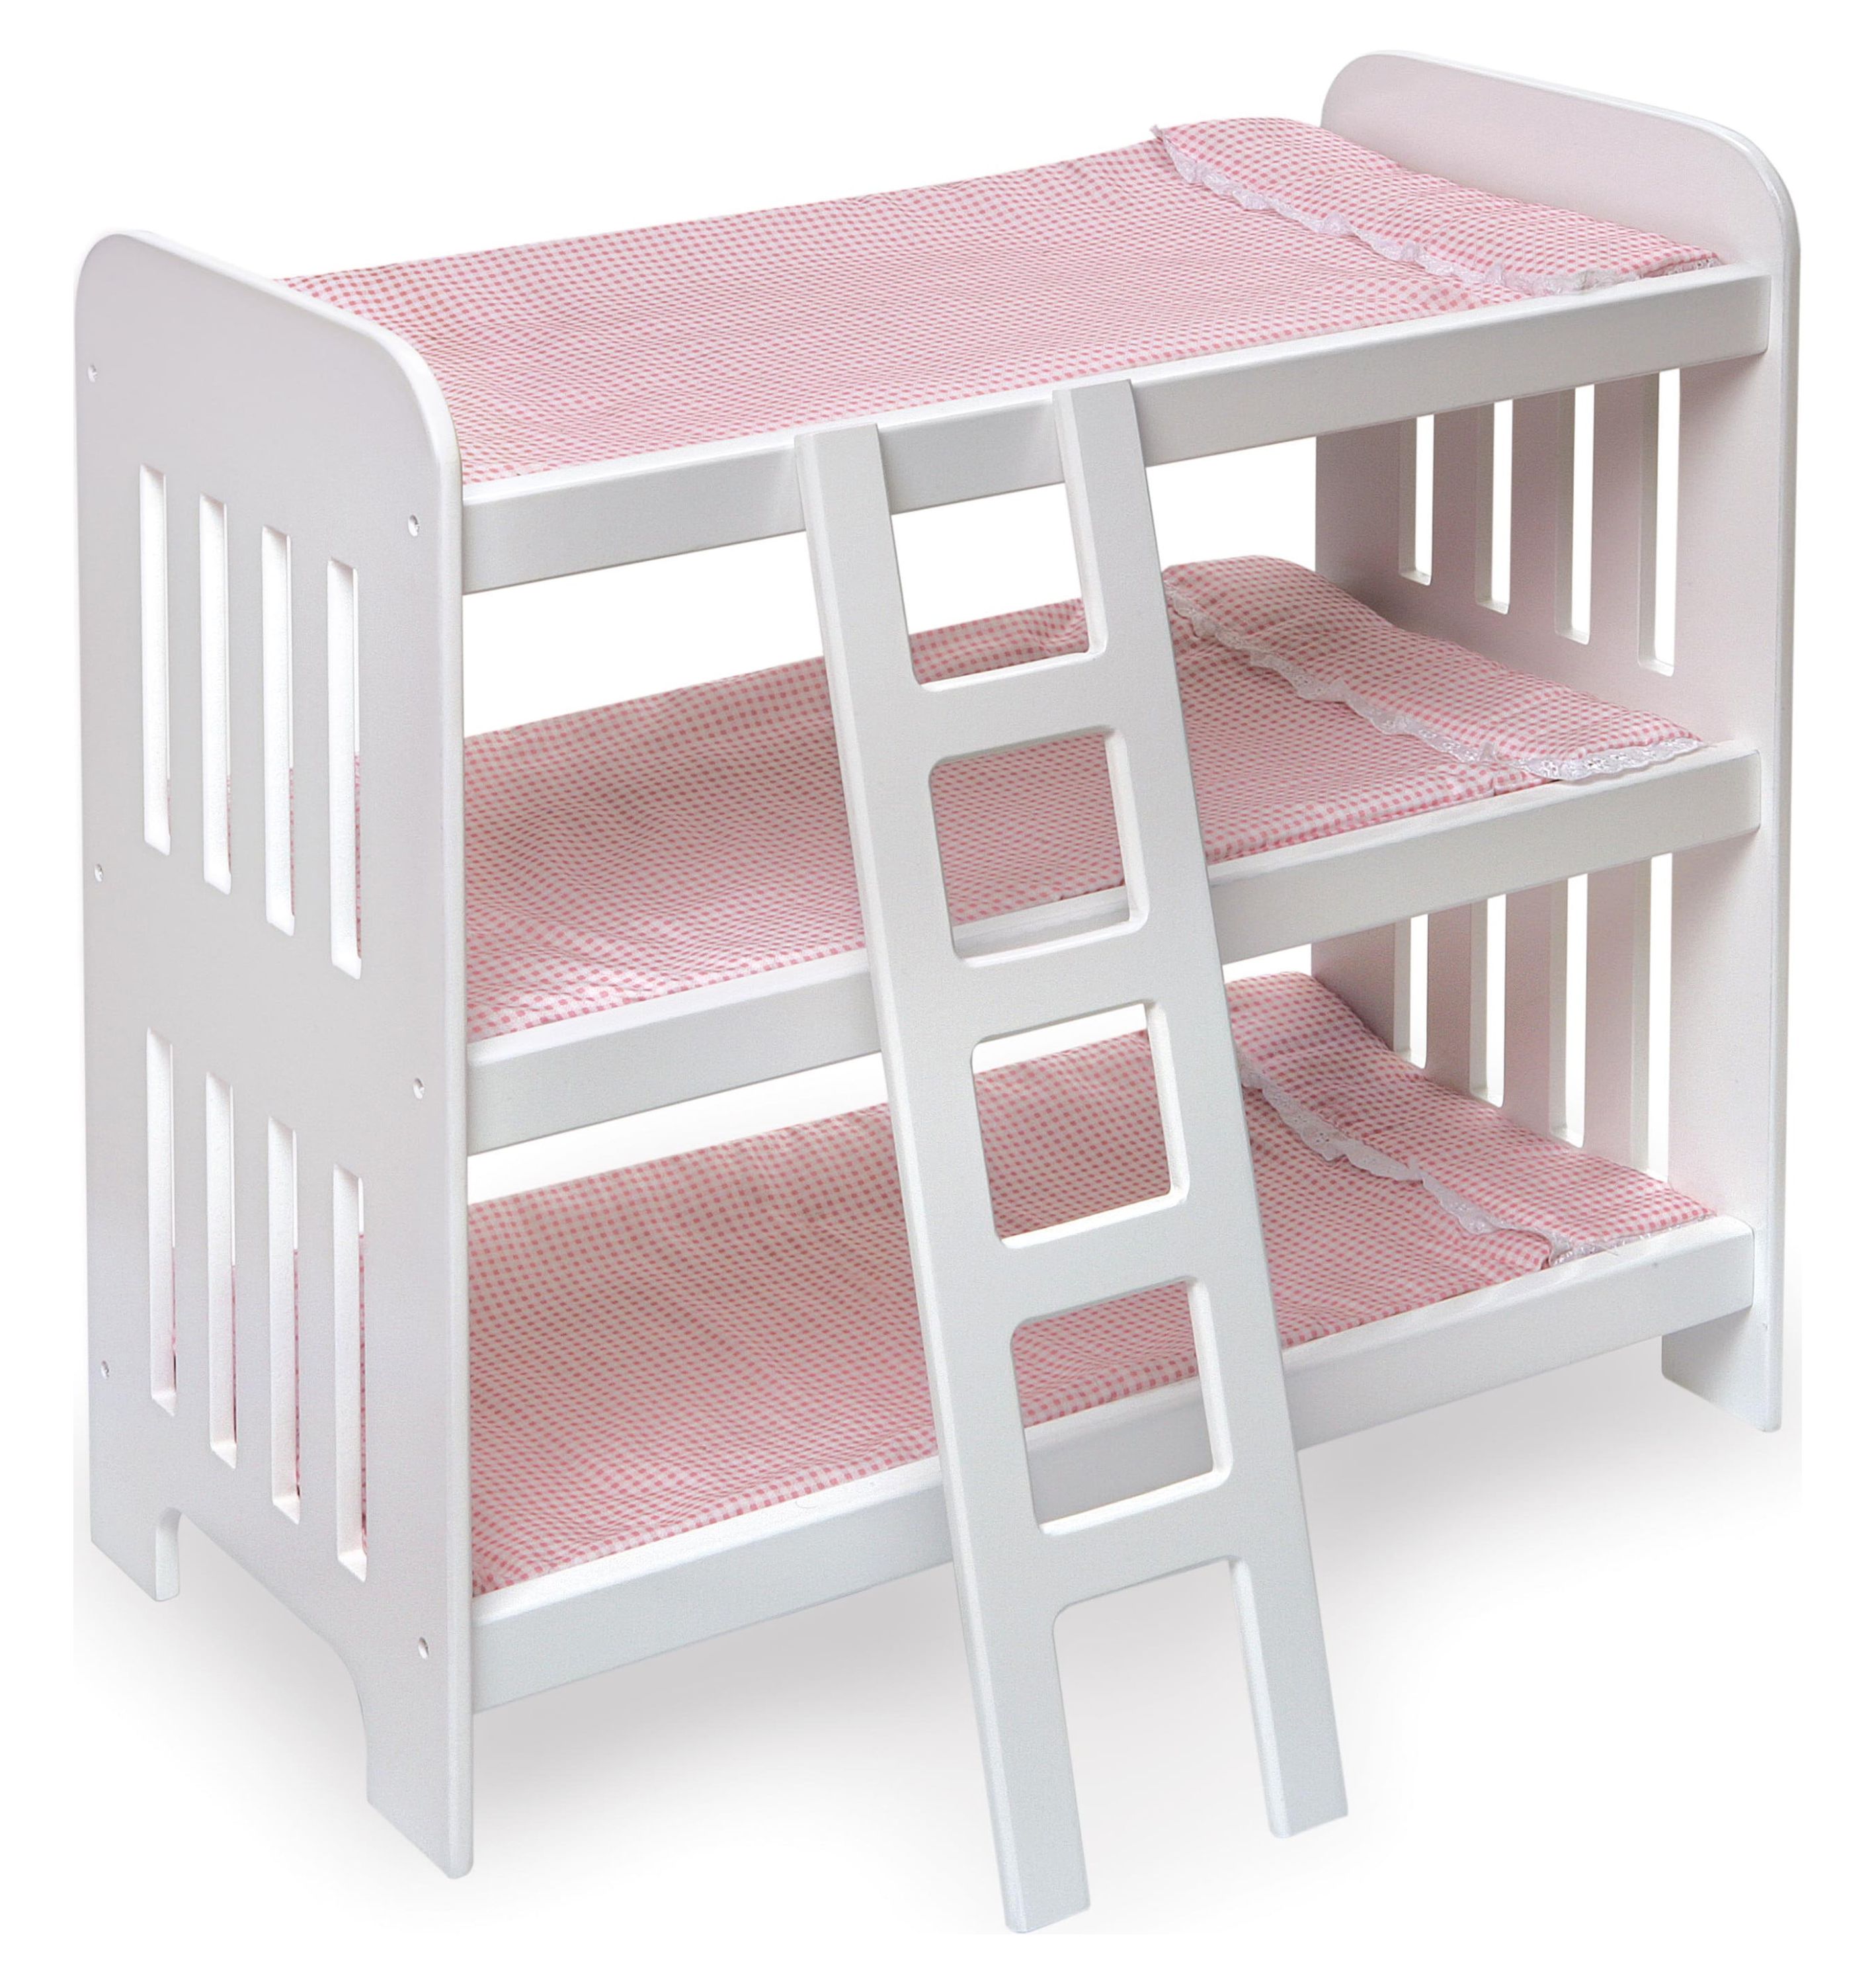 Badger Basket Triple Doll Bunk Bed with Ladder, Bedding, and Free Personalization Kit - Pink Gingham - image 1 of 12